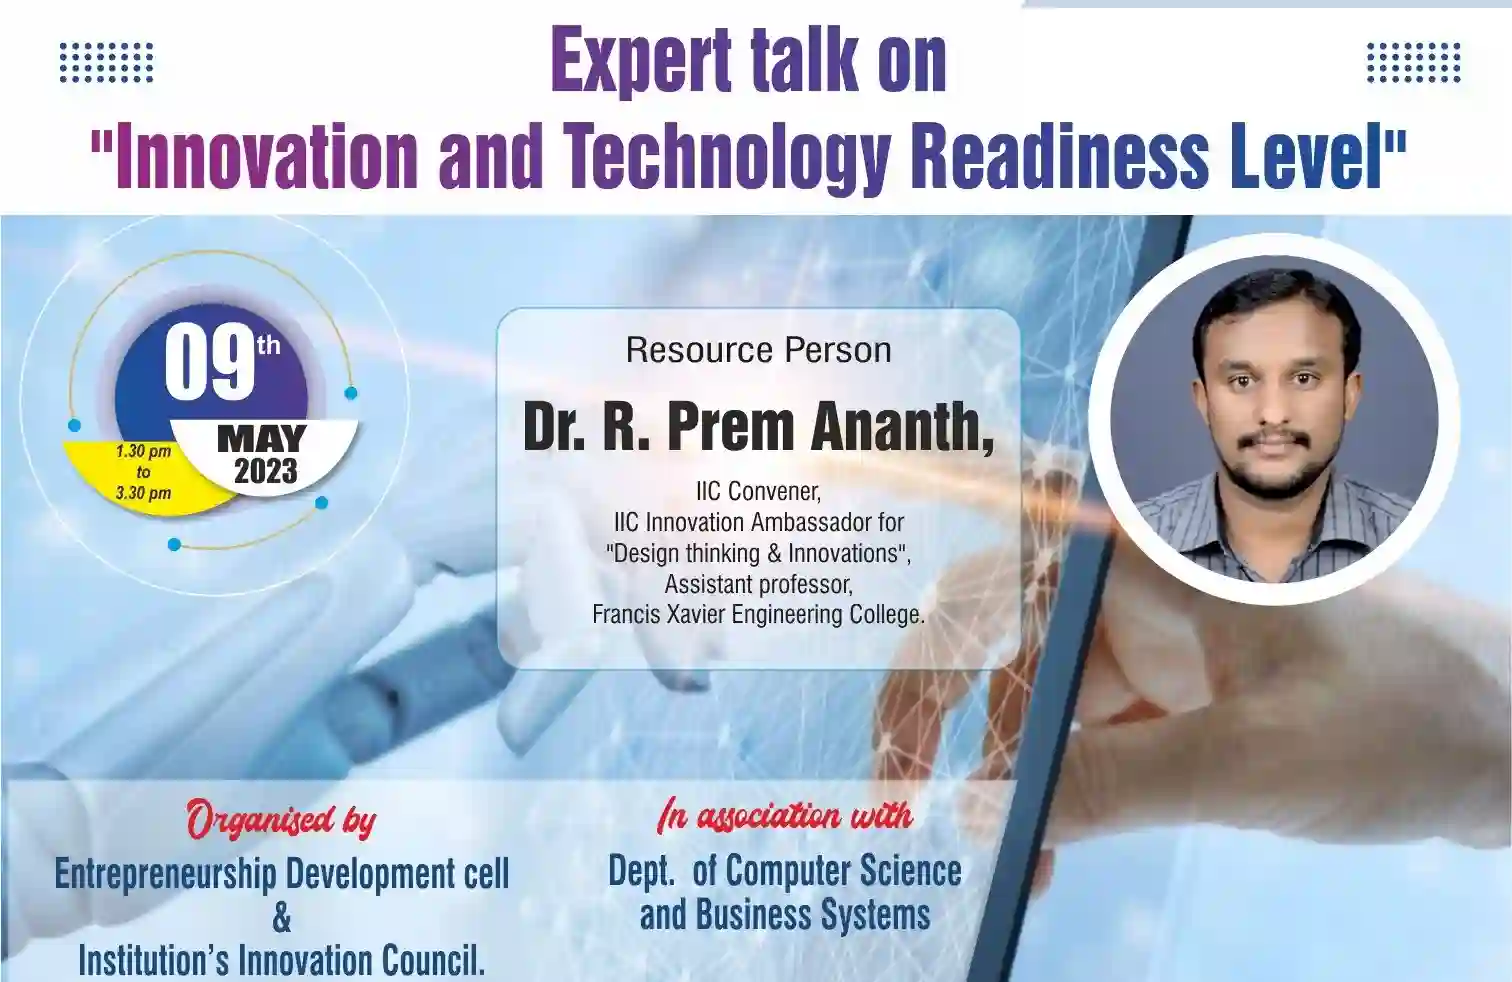 Expert talk on Innovation and Technology Readiness Level